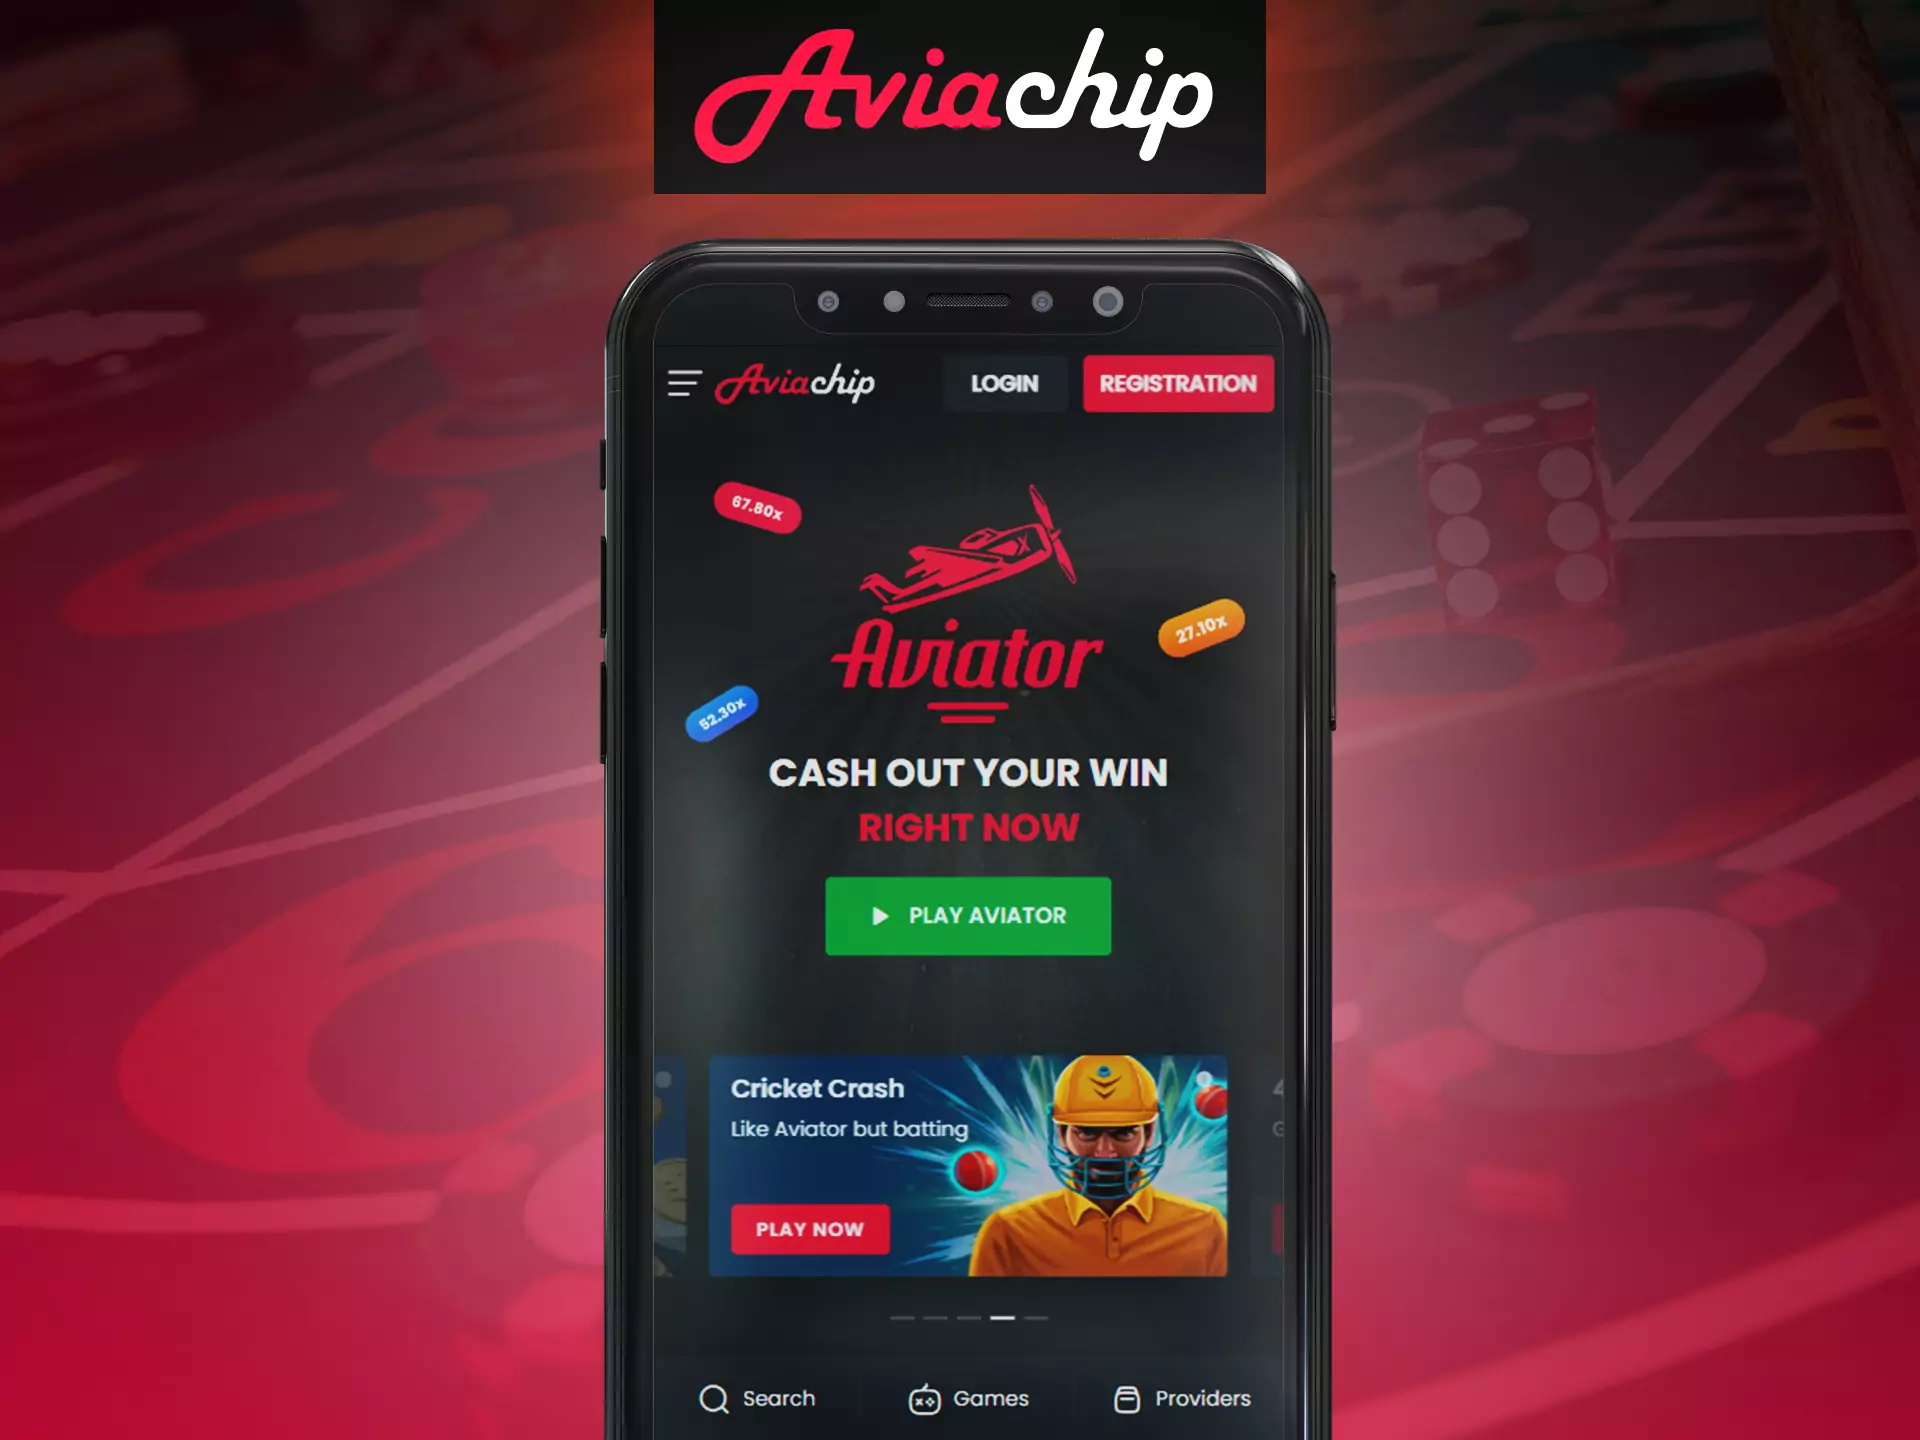 Try Aviachip's mobile website for betting and gaming.